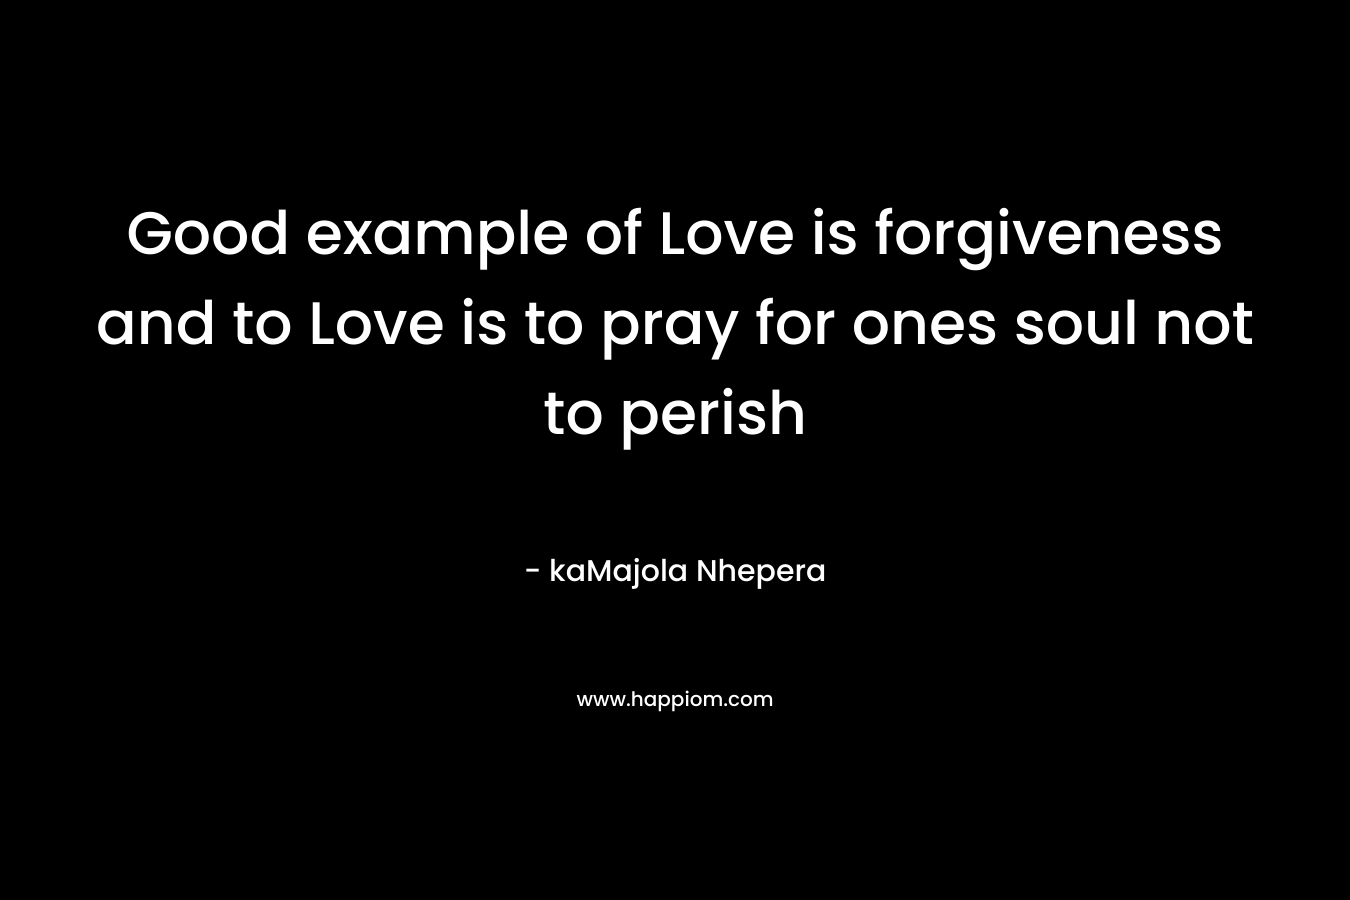 Good example of Love is forgiveness and to Love is to pray for ones soul not to perish – kaMajola Nhepera